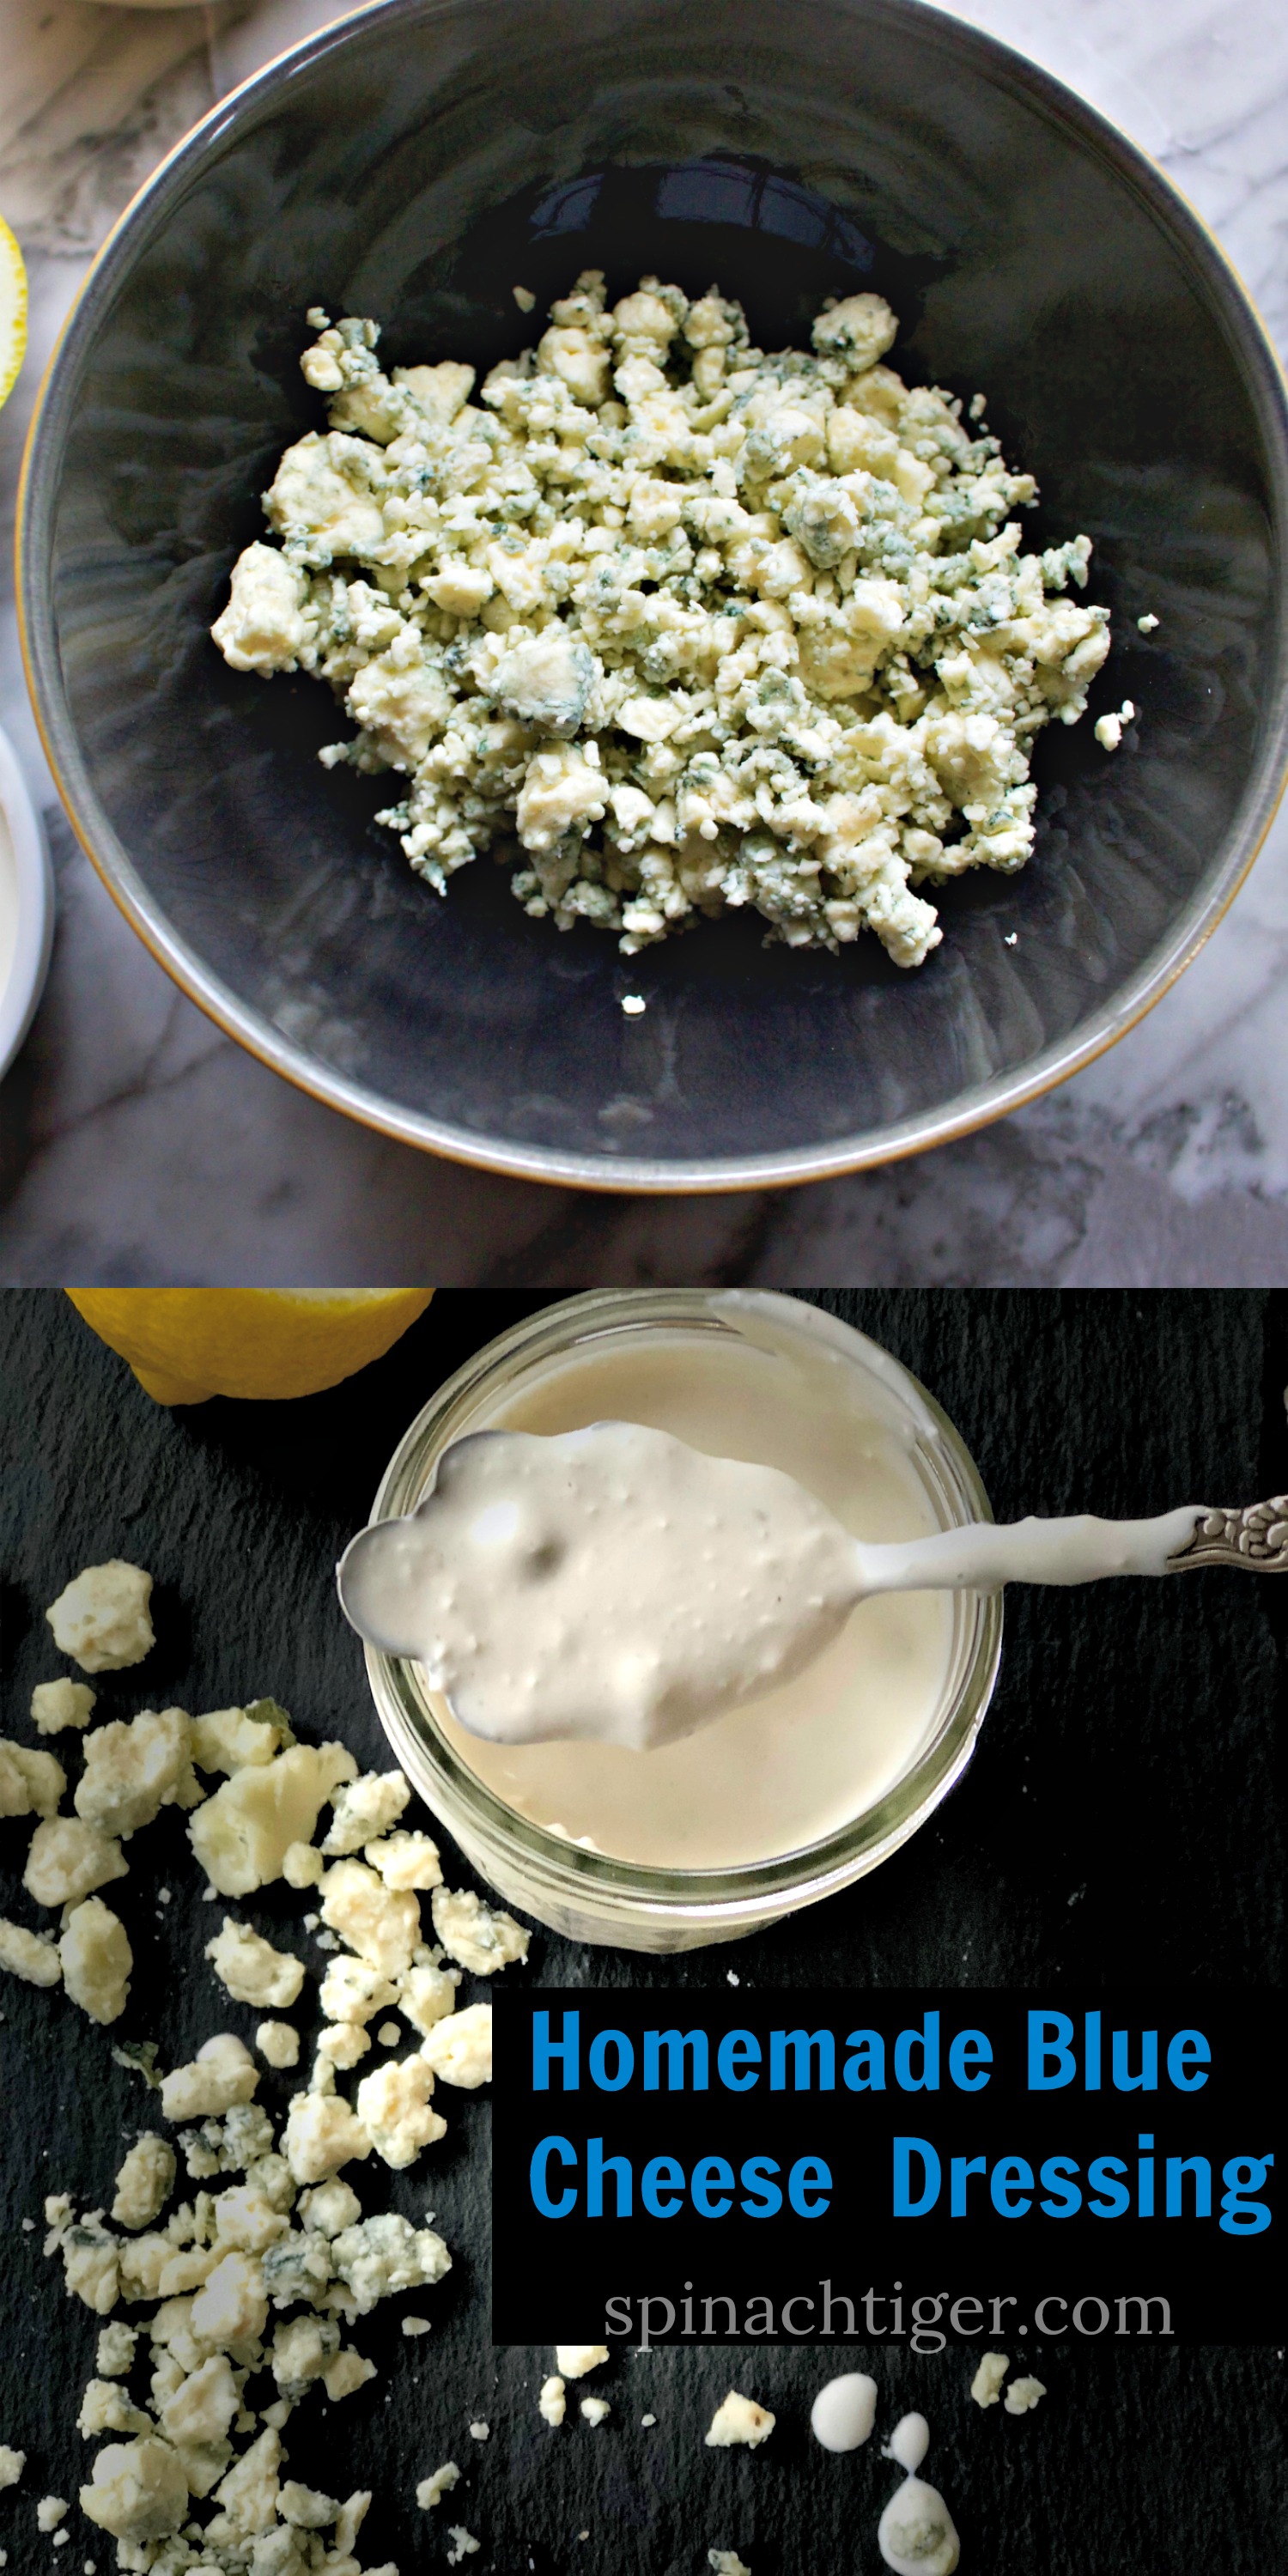 Homemade Blue Cheese Dressing from Spinach TIger